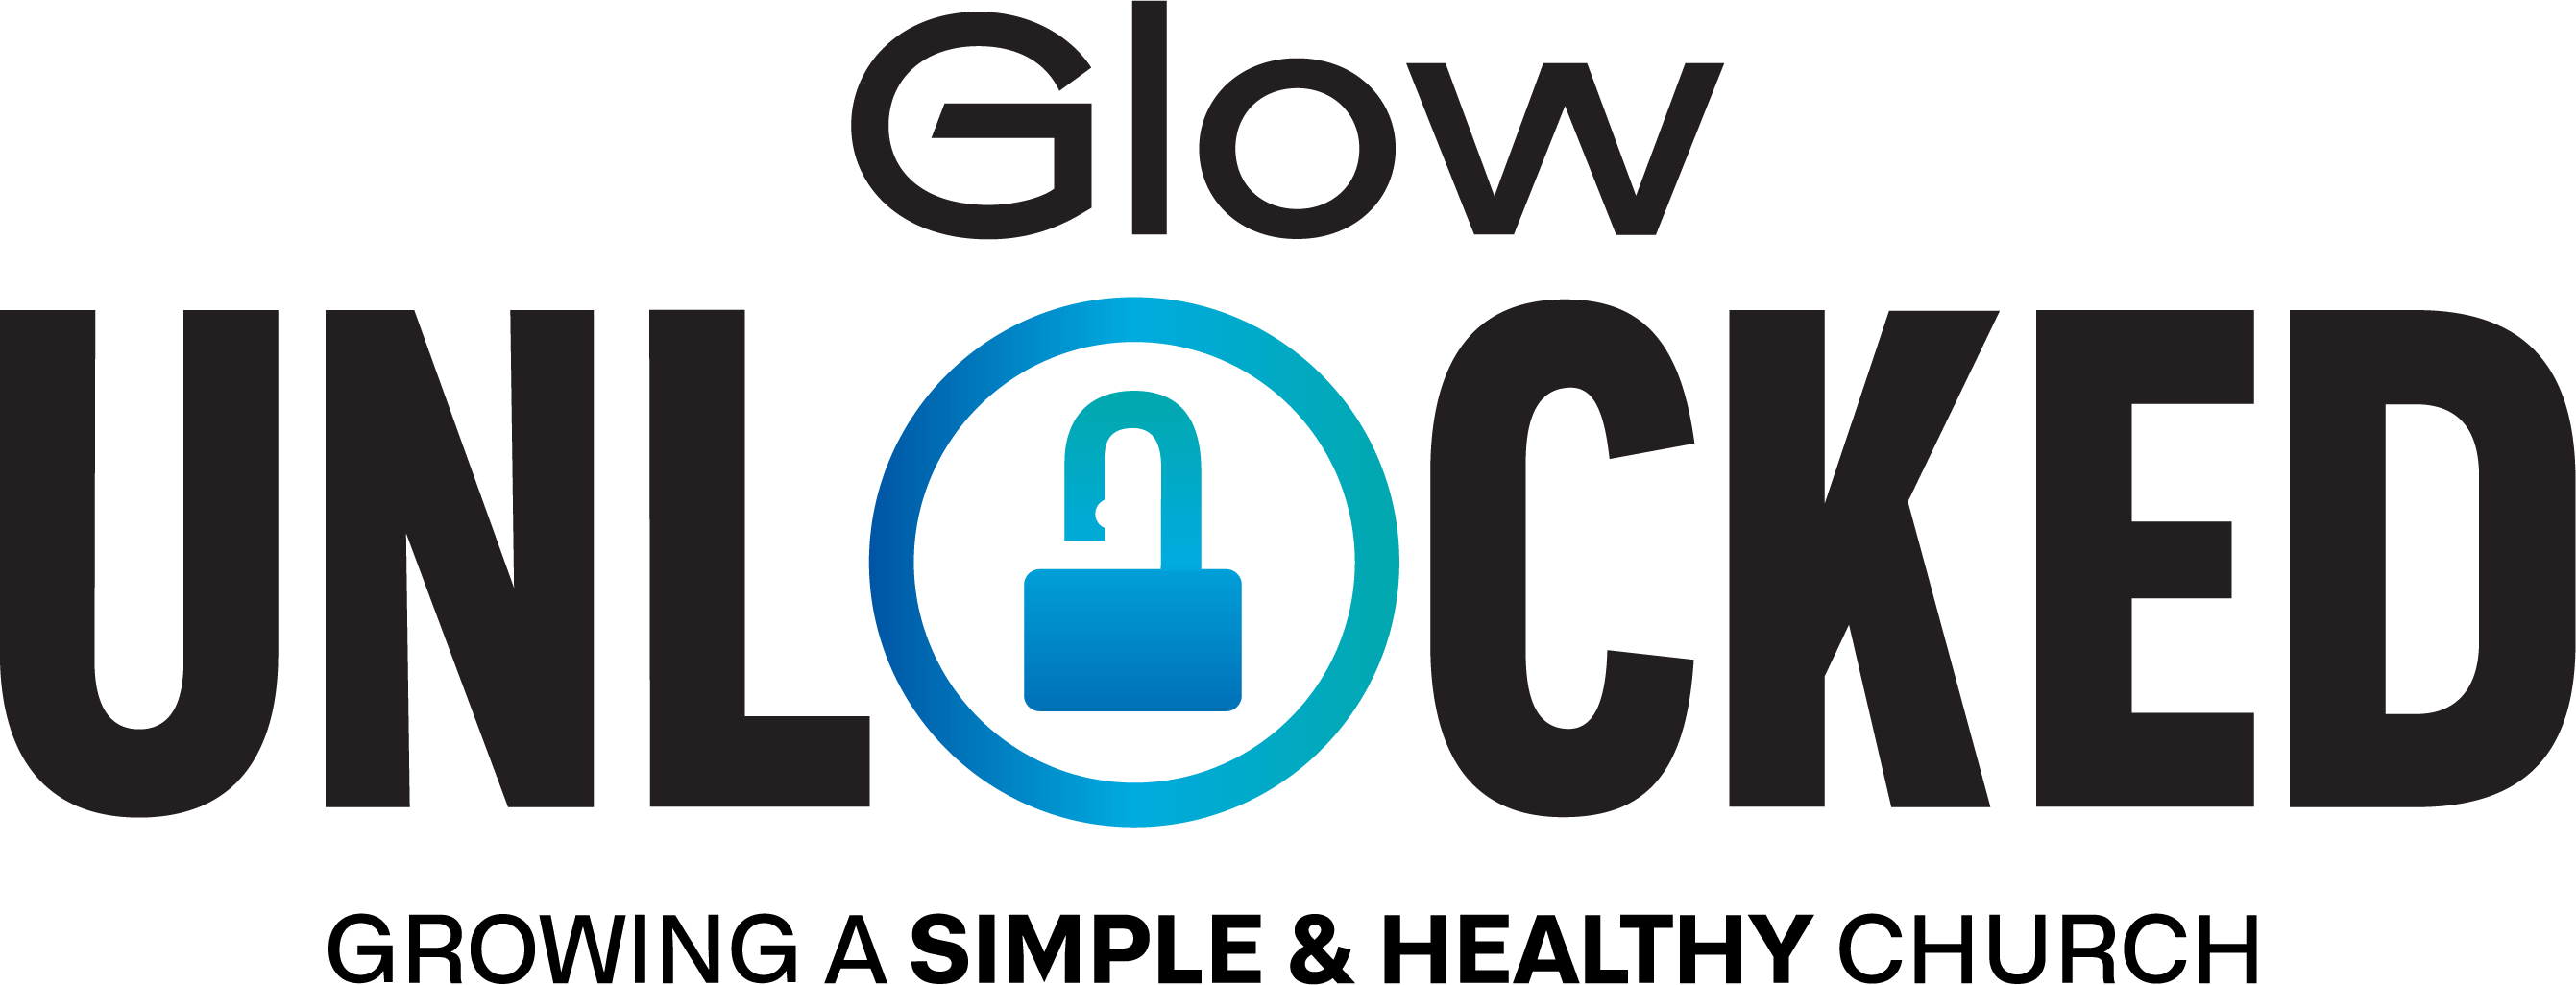 Glow Unlocked, growing simple and healthy church